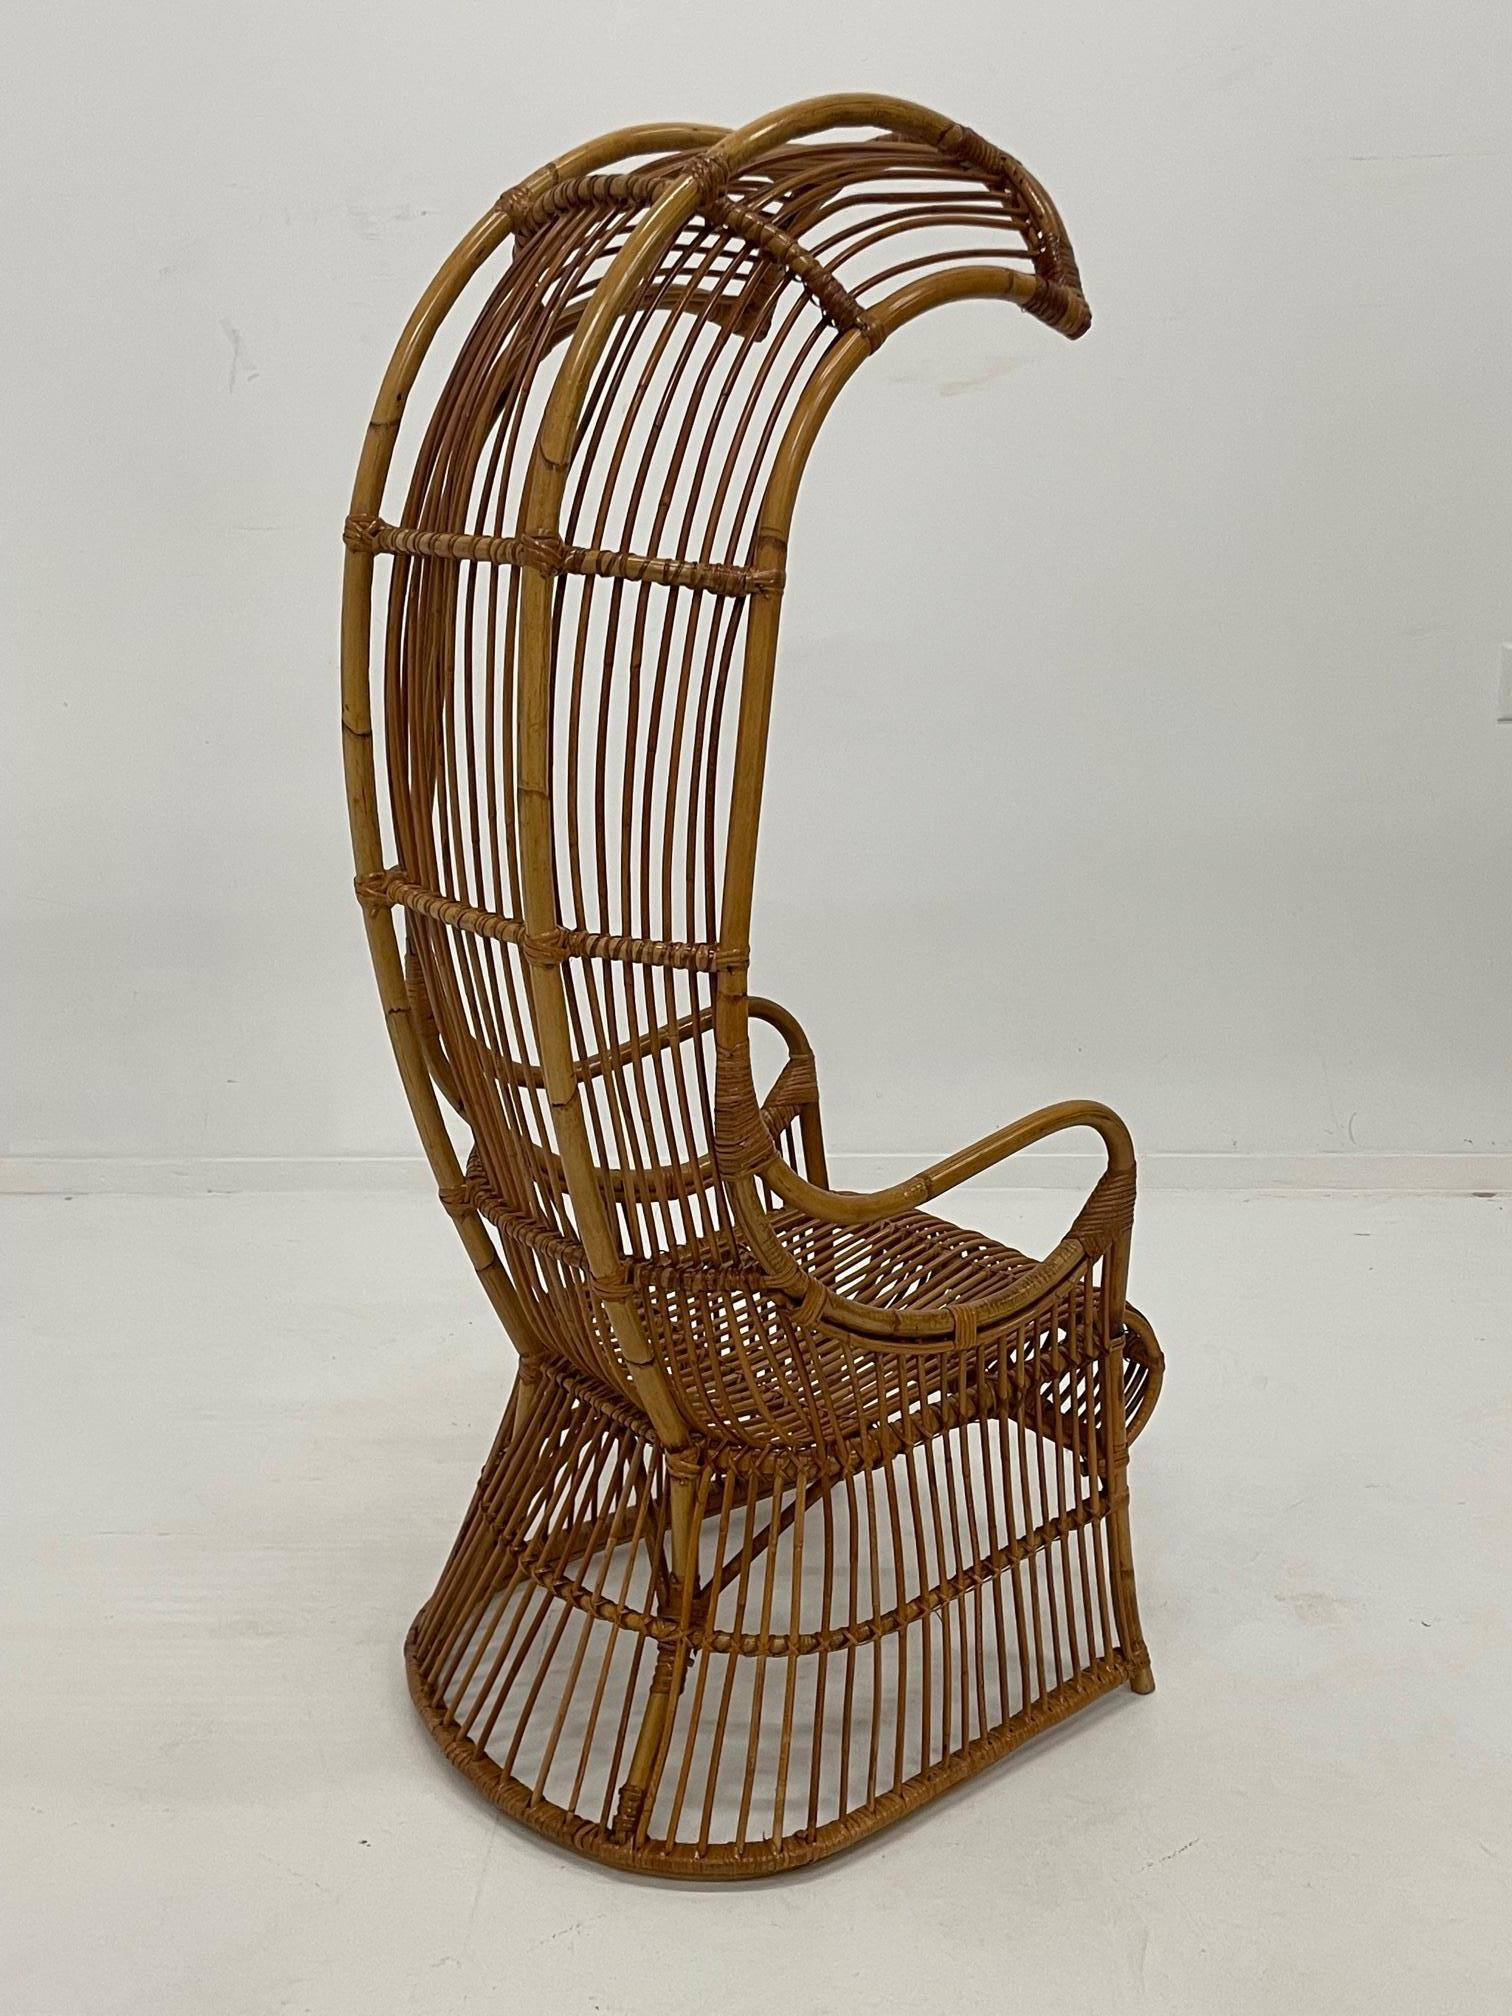 Incredible Rare Vintage Rattan Porters Chair with Sculptural Silhouette For Sale 4